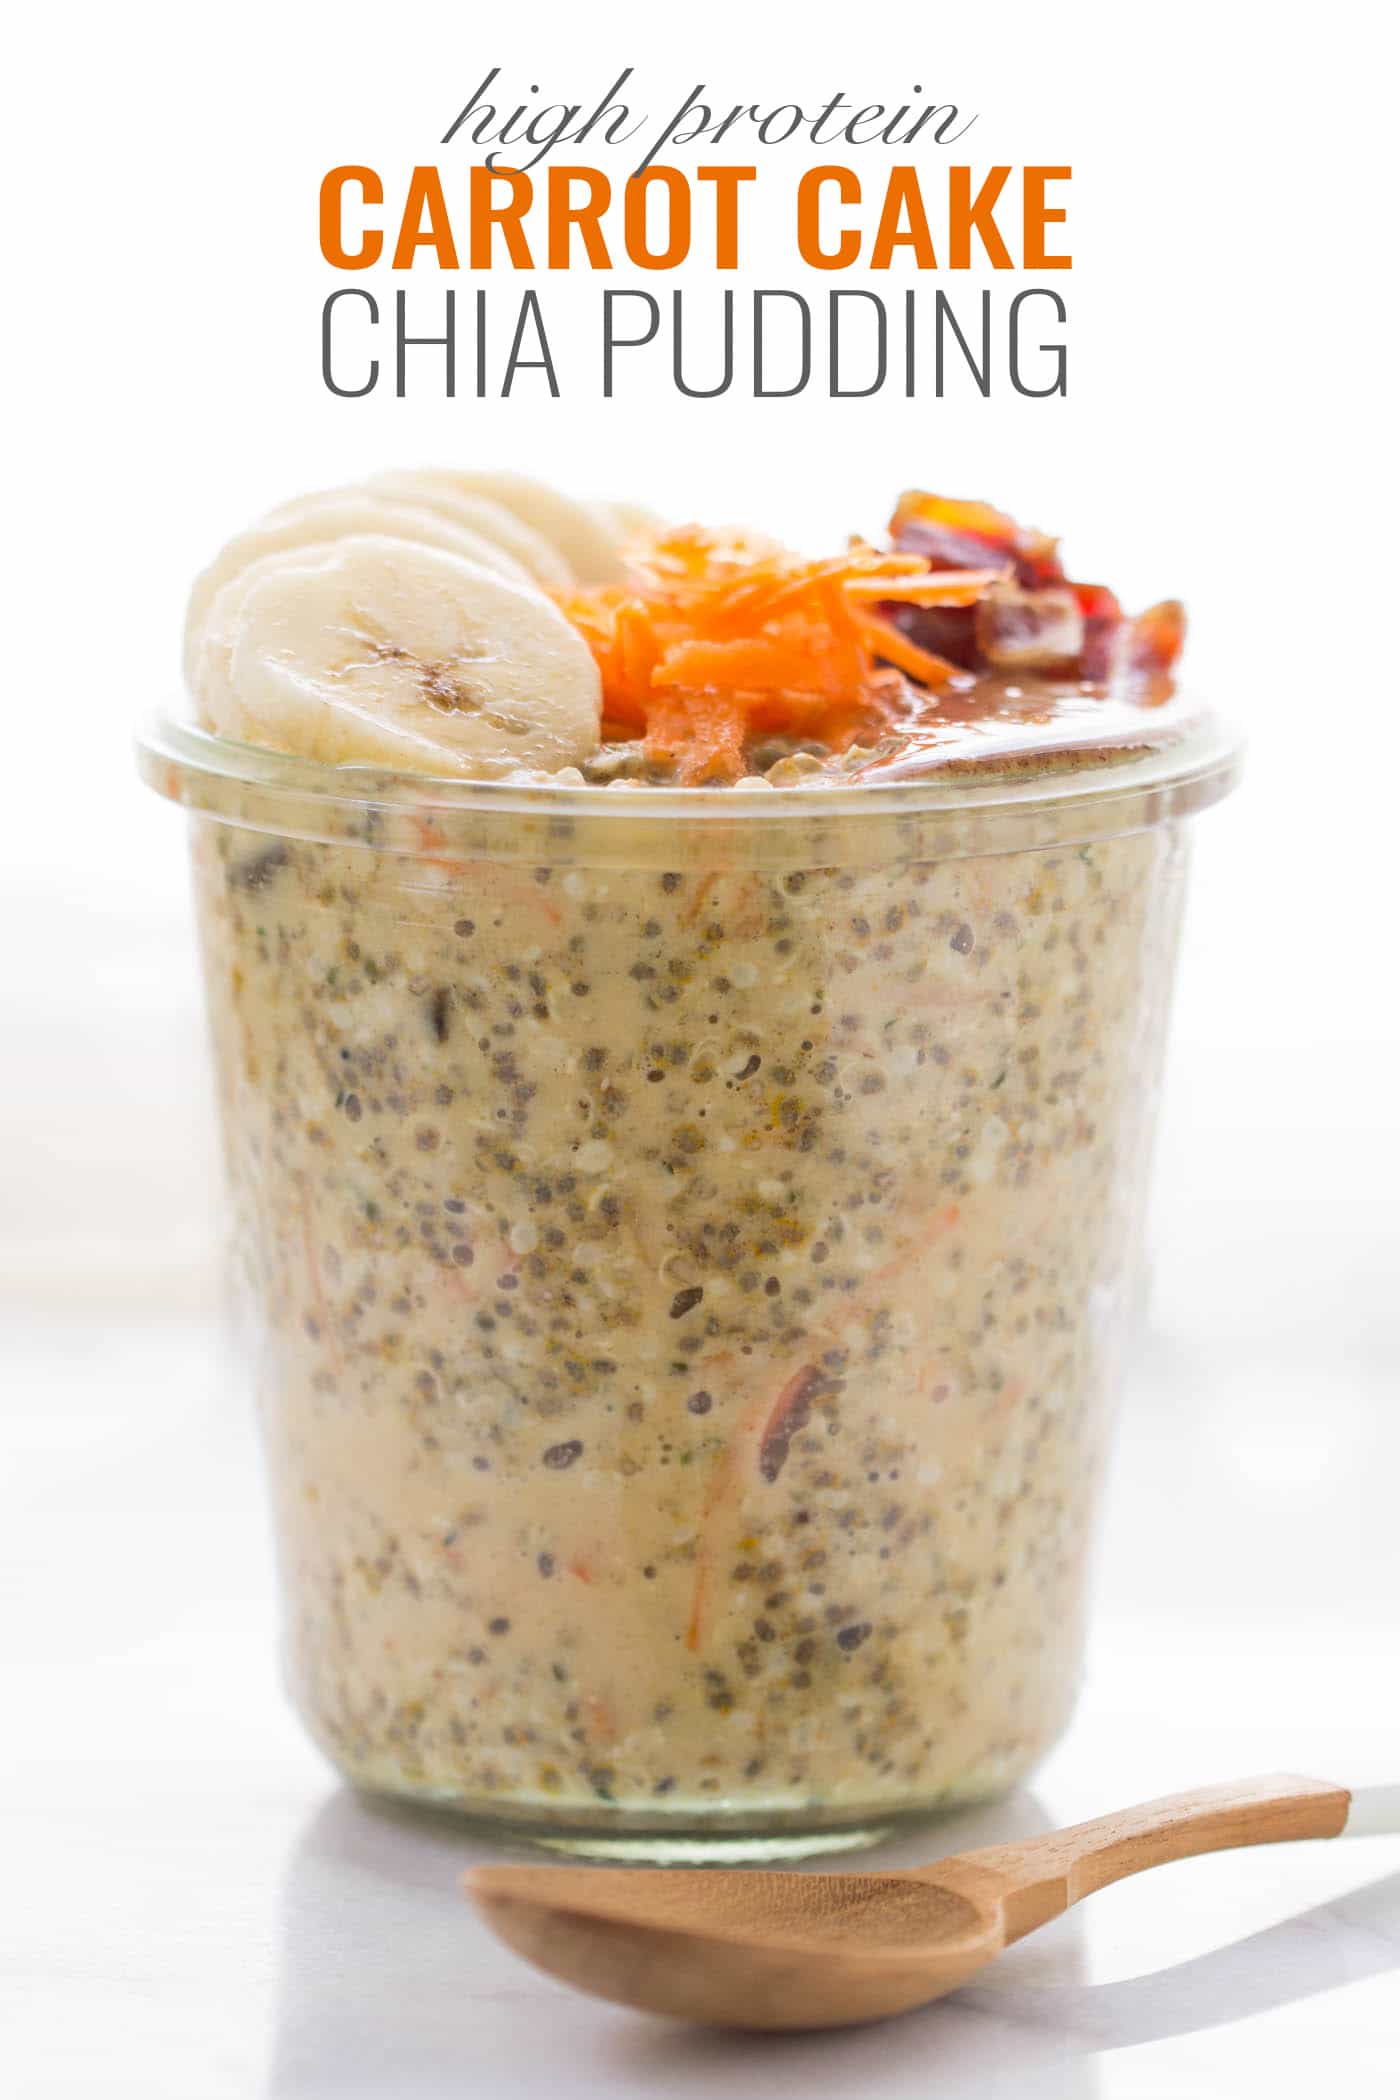 {high protein!} Carrot Cake Chia Pudding...with 12g of protein per serving WITHOUT the use of any protein powders!